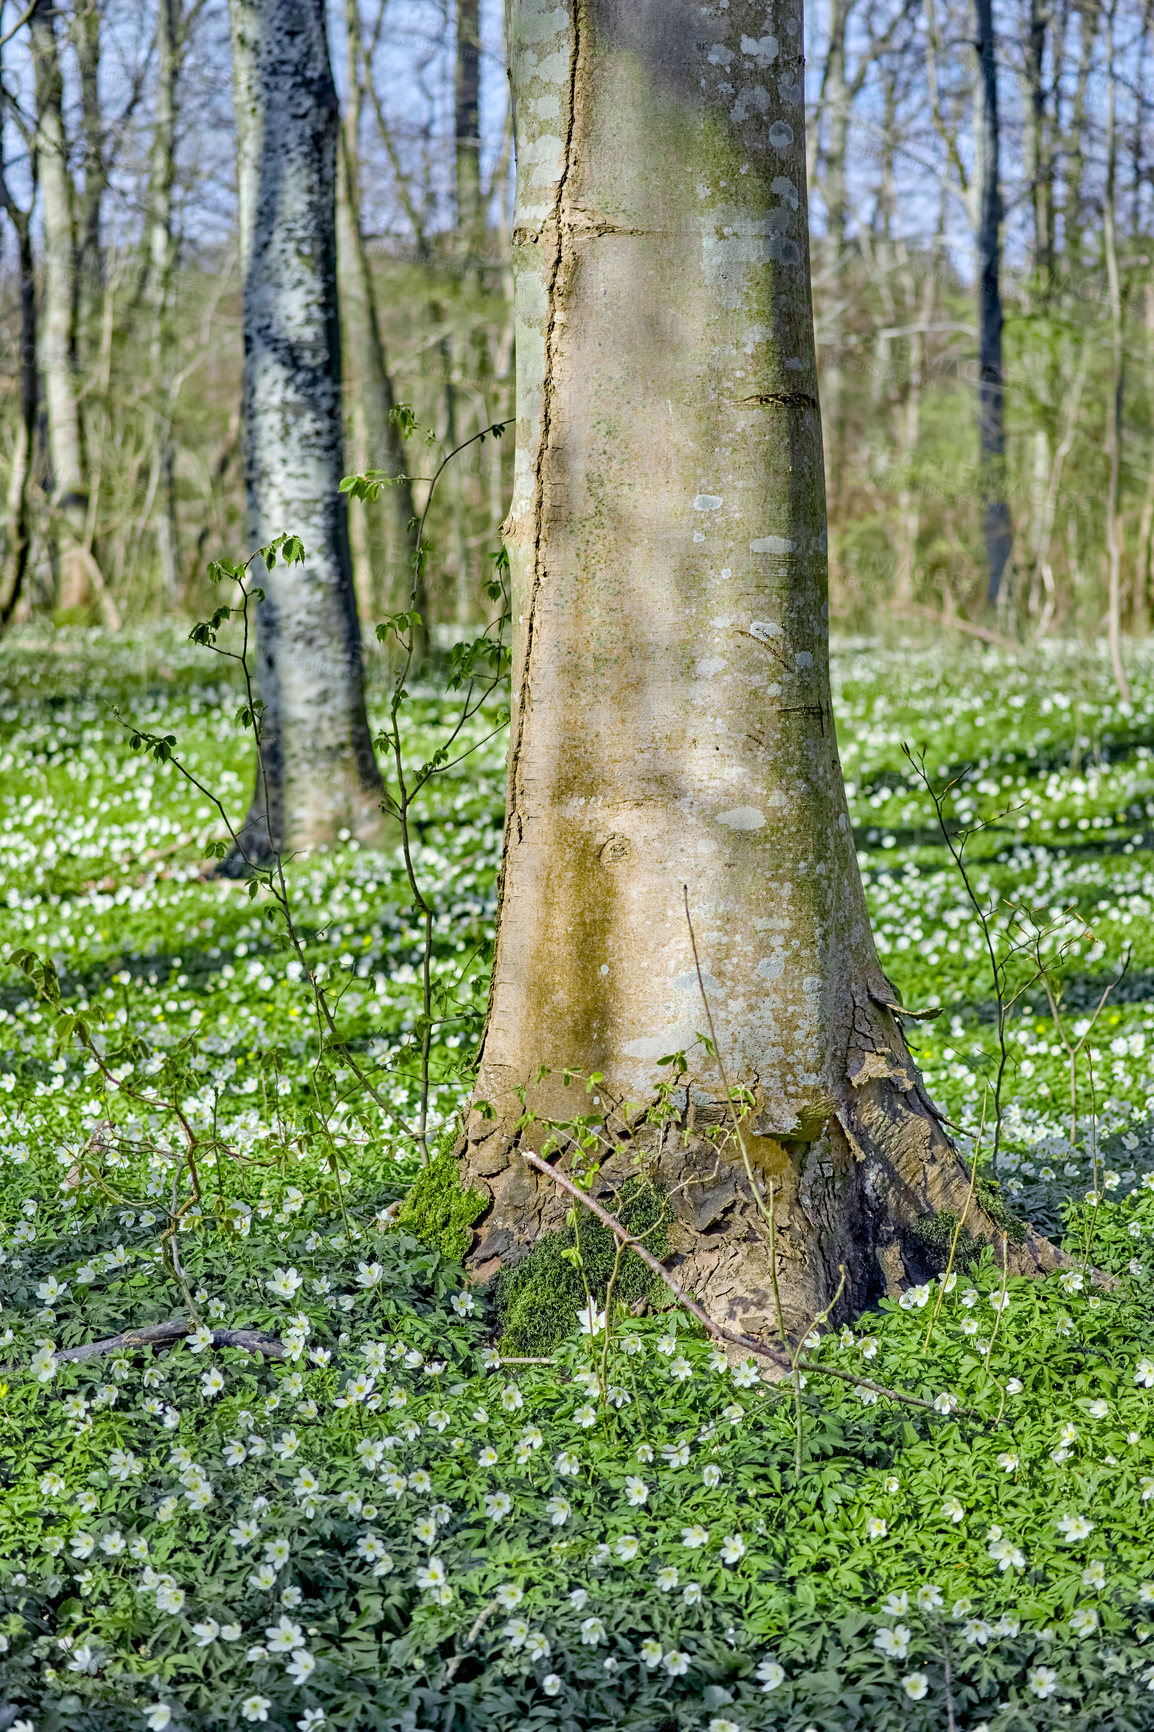 Buy stock photo Flower field with trees in a forest. Beautiful landscape of many wood anemone flowers blooming or growing near a birch trunk in a spring meadow. Pretty white flowering plant or wild flowers in nature